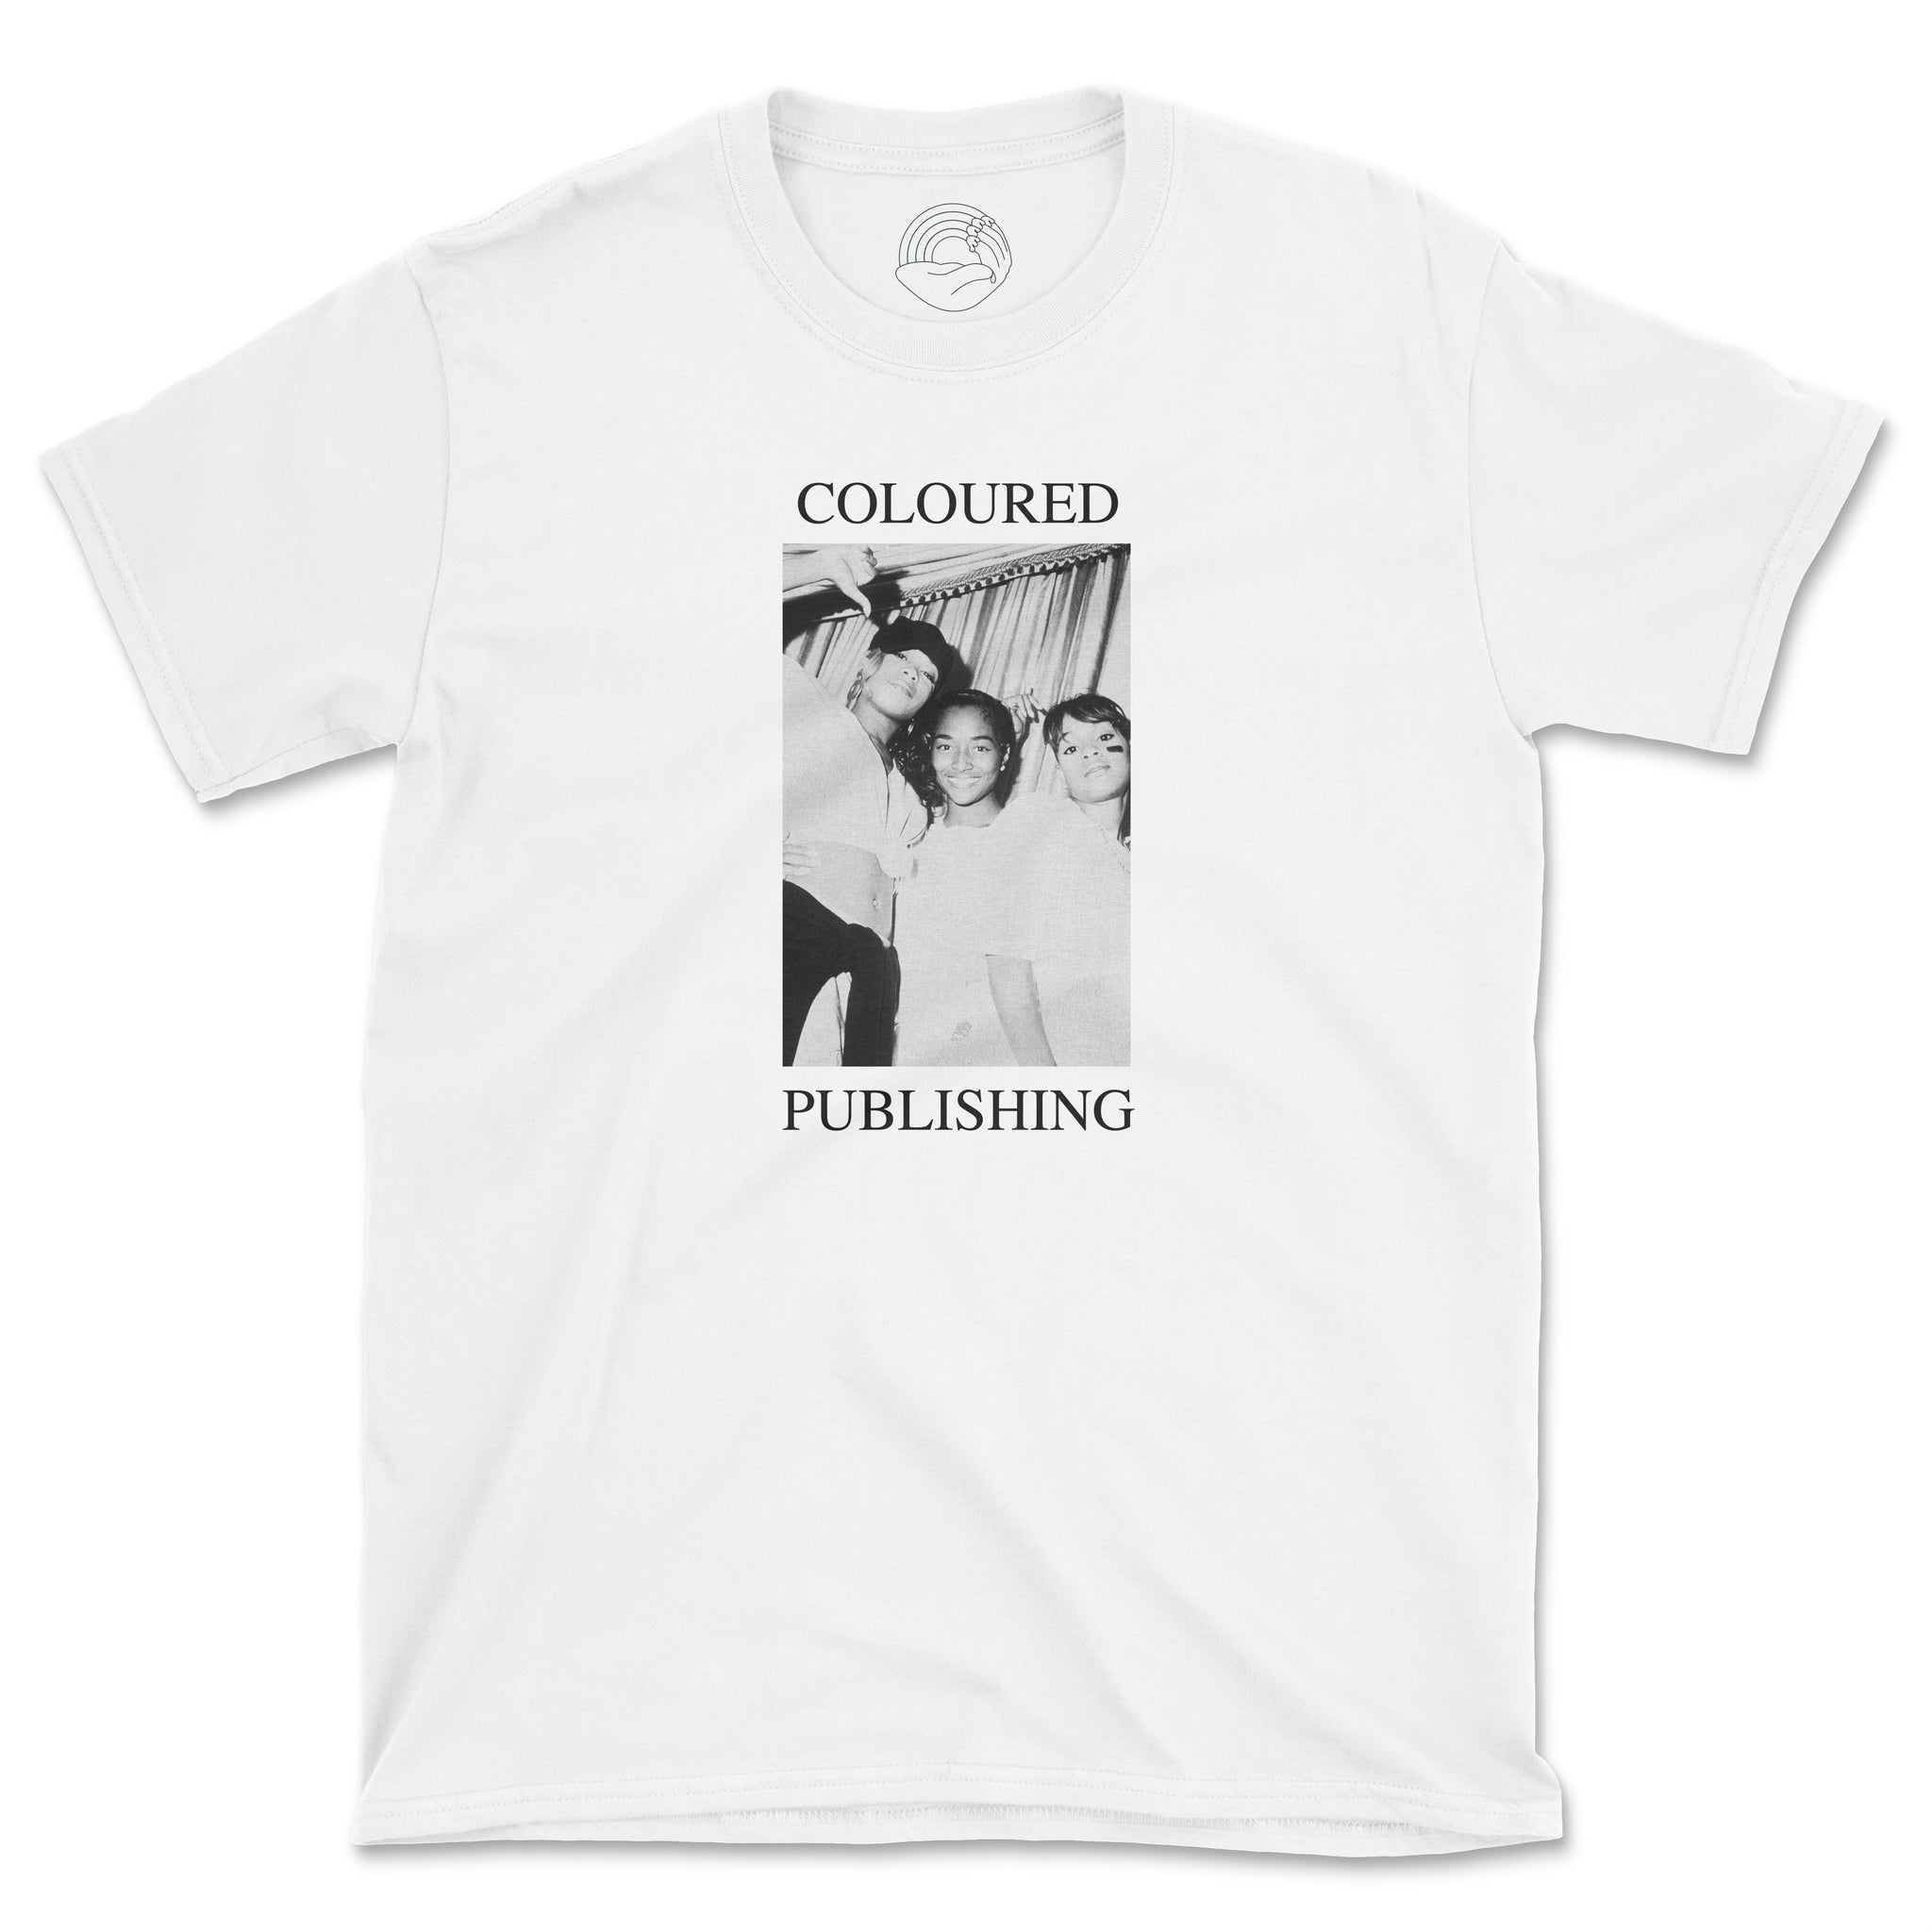 Photo of a t-shirt with an image of TLC and text "Coloured Publishing"